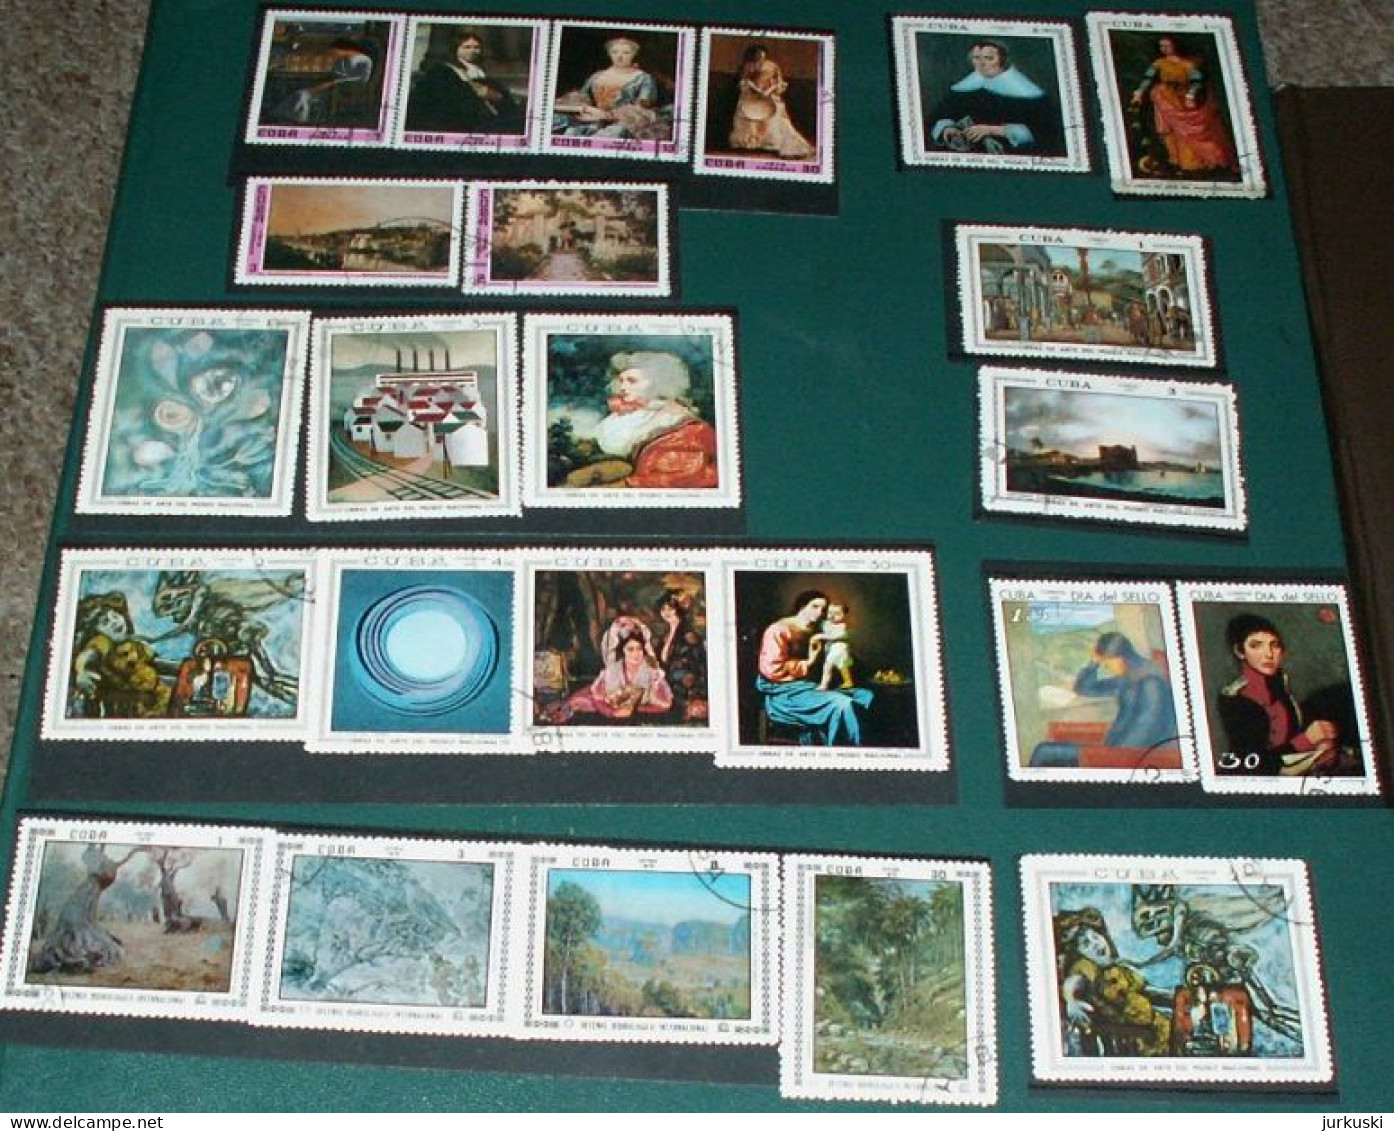 Cuba - Paintins / Set Of 24values - 1969 / 1970 / 1972 / 1976 - USED - Used Stamps